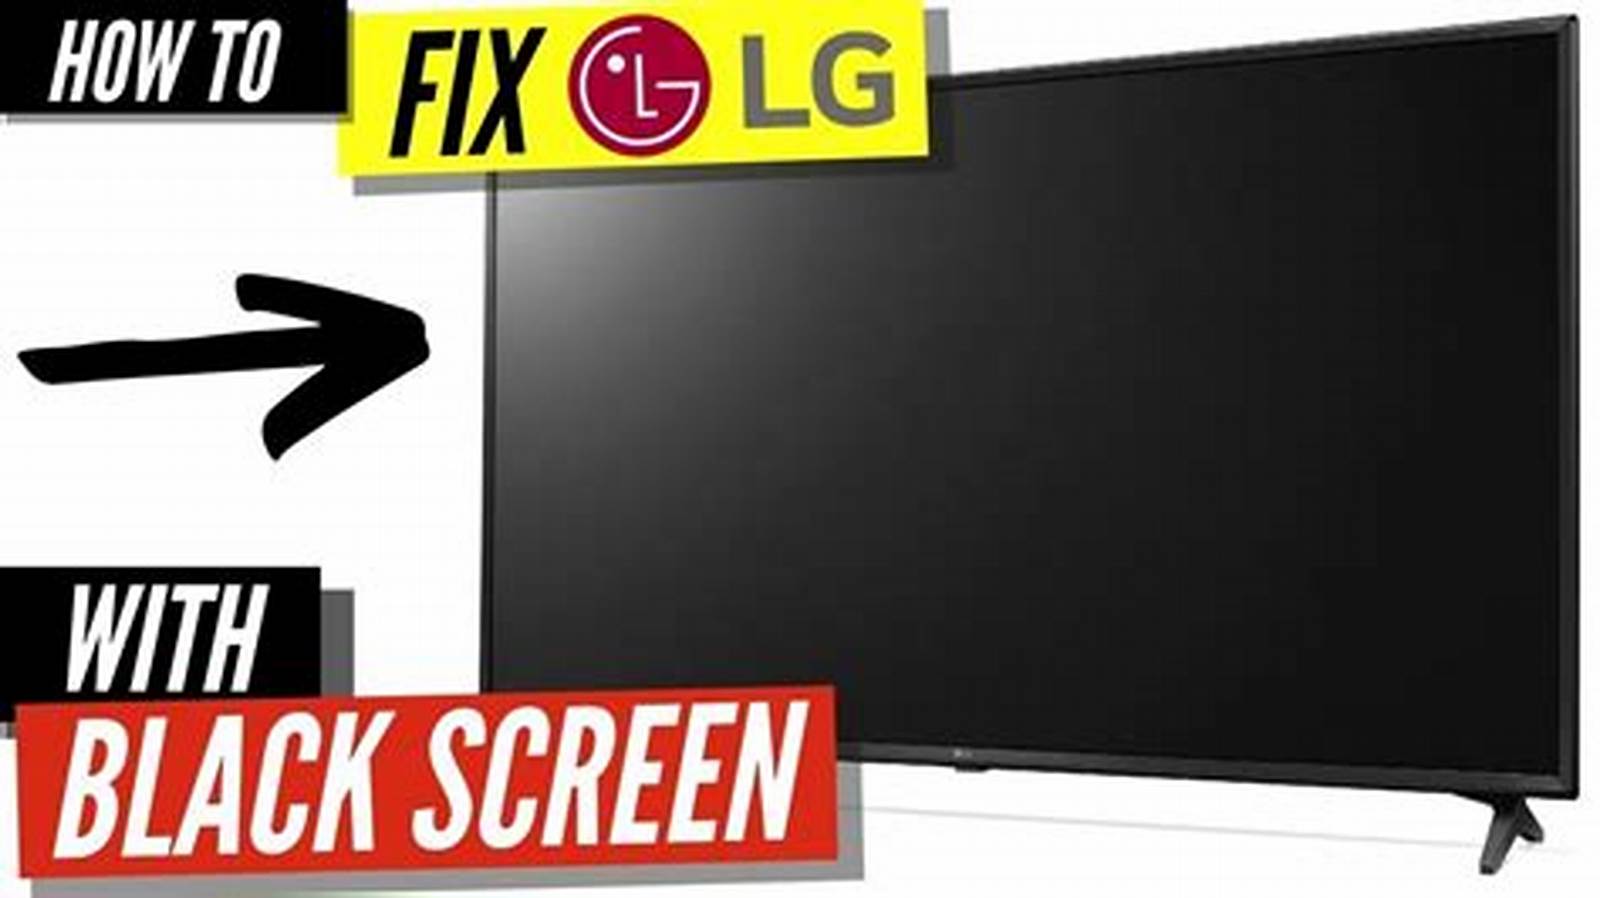 LG TV with a black screen